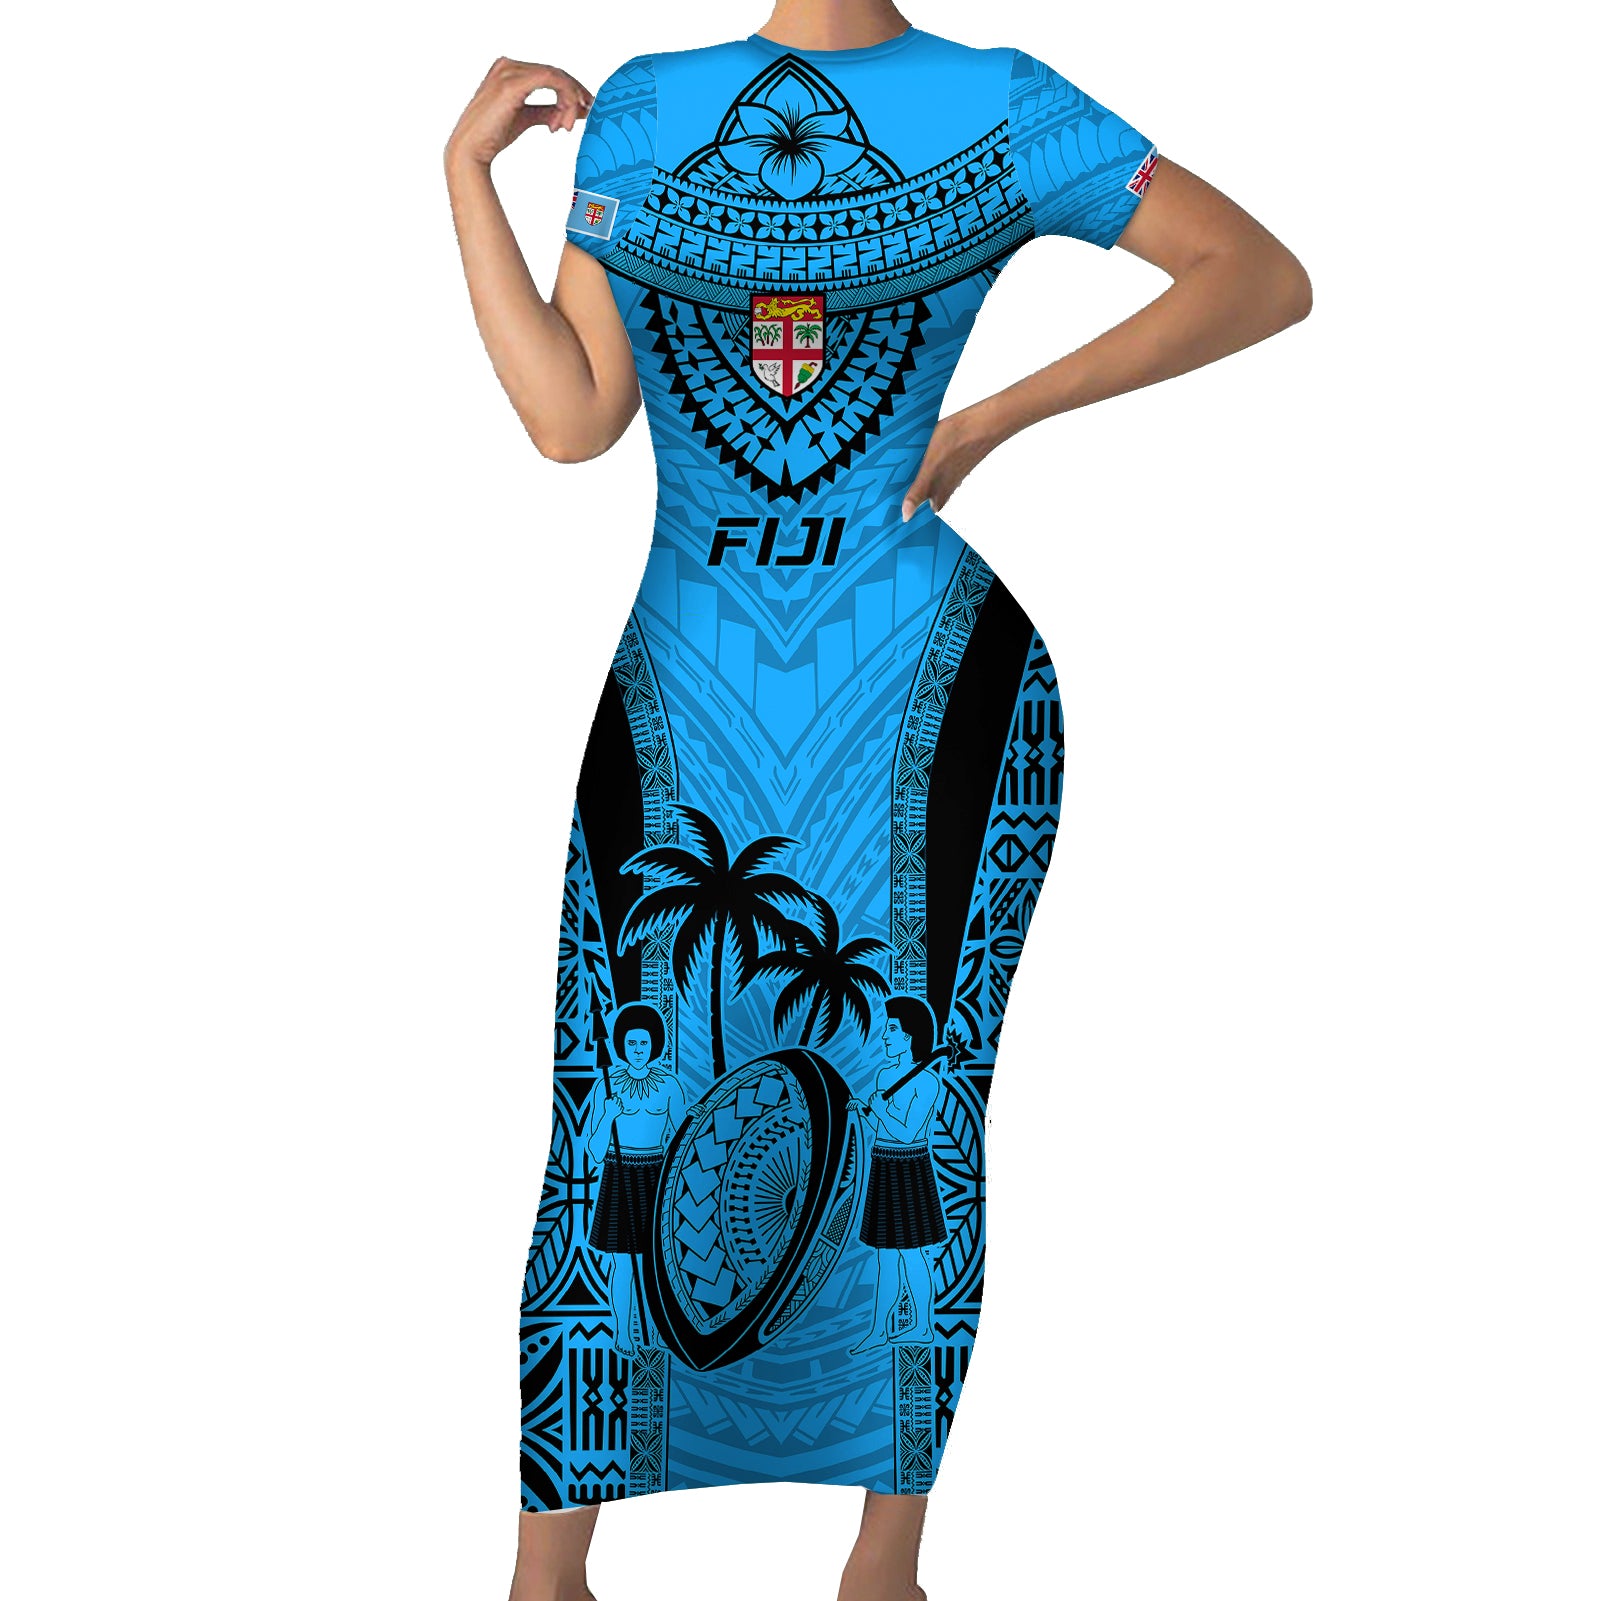 Fiji Rugby Short Sleeve Bodycon Dress Go Champions World Cup 2023 Tapa Unique Blue Vibe LT9 Long Dress Blue - Polynesian Pride